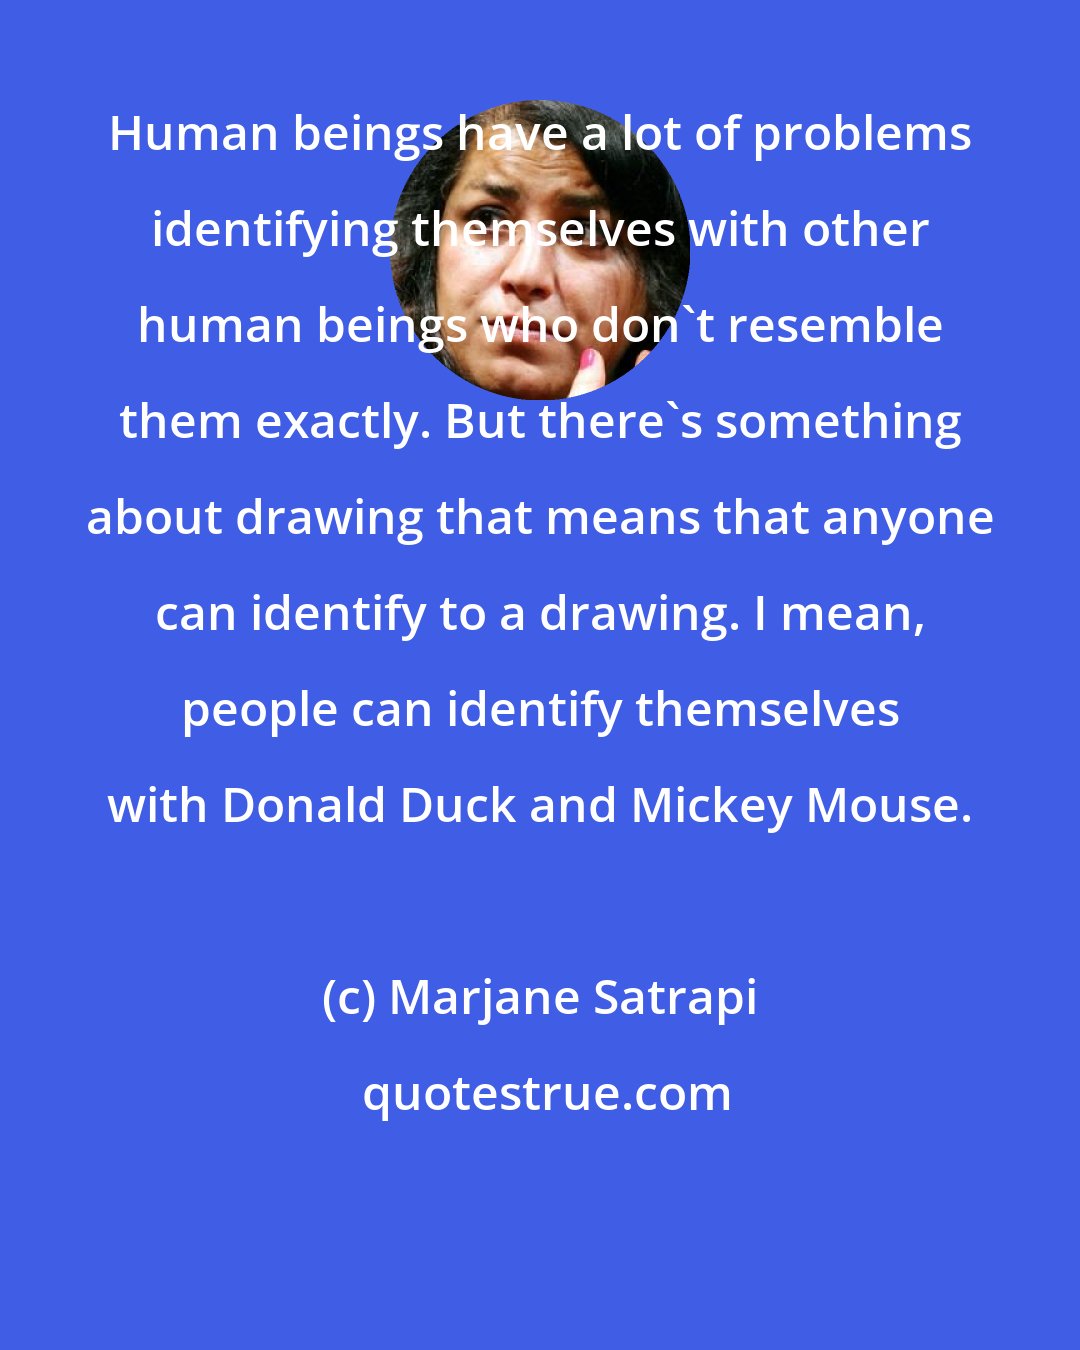 Marjane Satrapi: Human beings have a lot of problems identifying themselves with other human beings who don't resemble them exactly. But there's something about drawing that means that anyone can identify to a drawing. I mean, people can identify themselves with Donald Duck and Mickey Mouse.